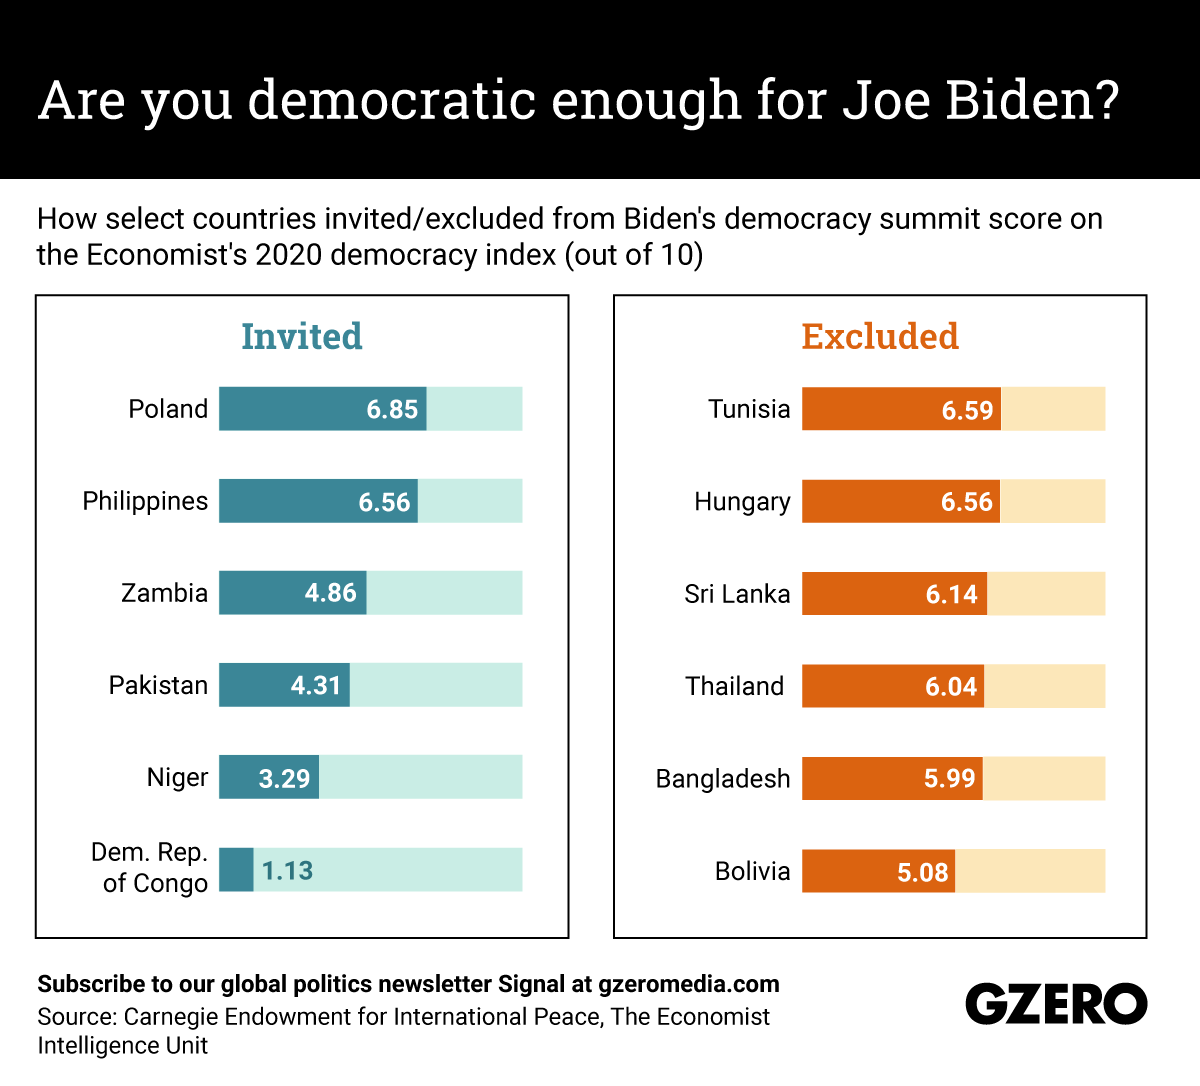 The Graphic Truth: Are you democratic enough for Joe Biden?